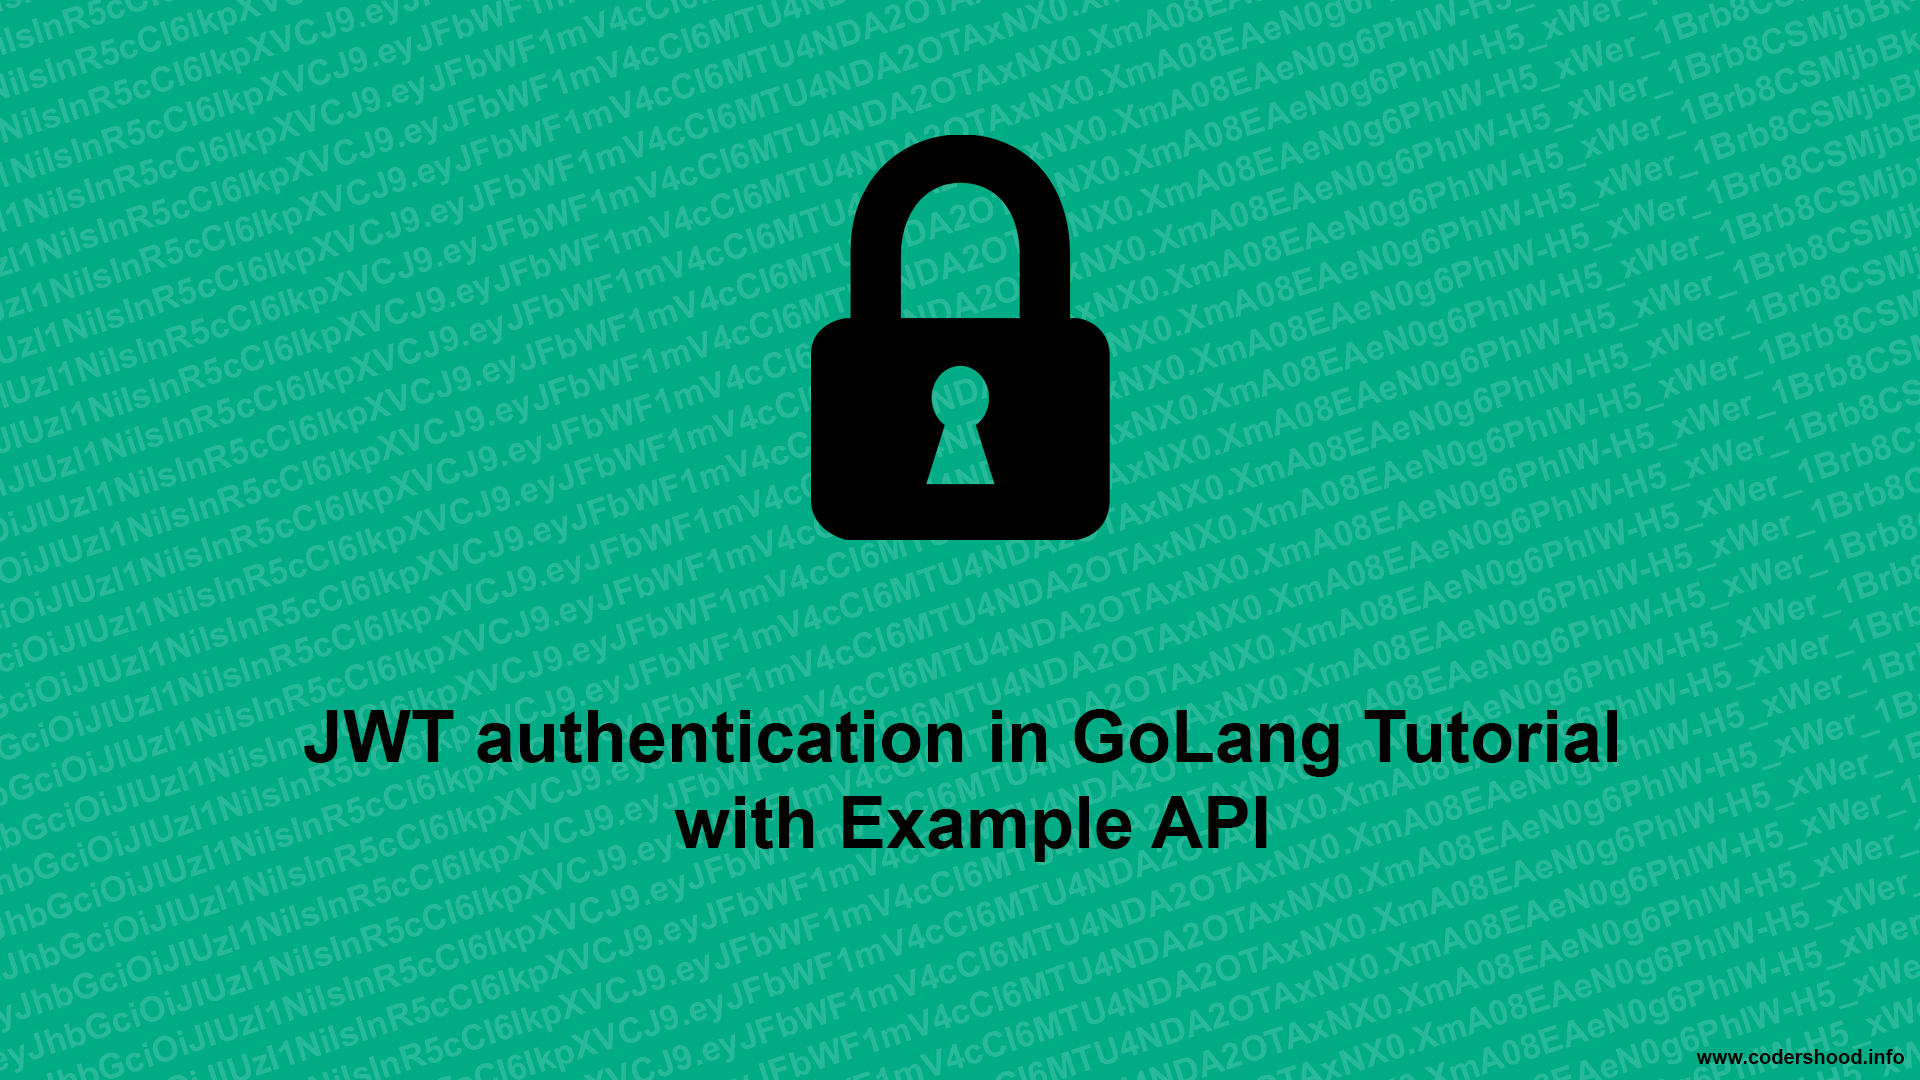 JWT authentication in GoLang Tutorial with Example API Bannner